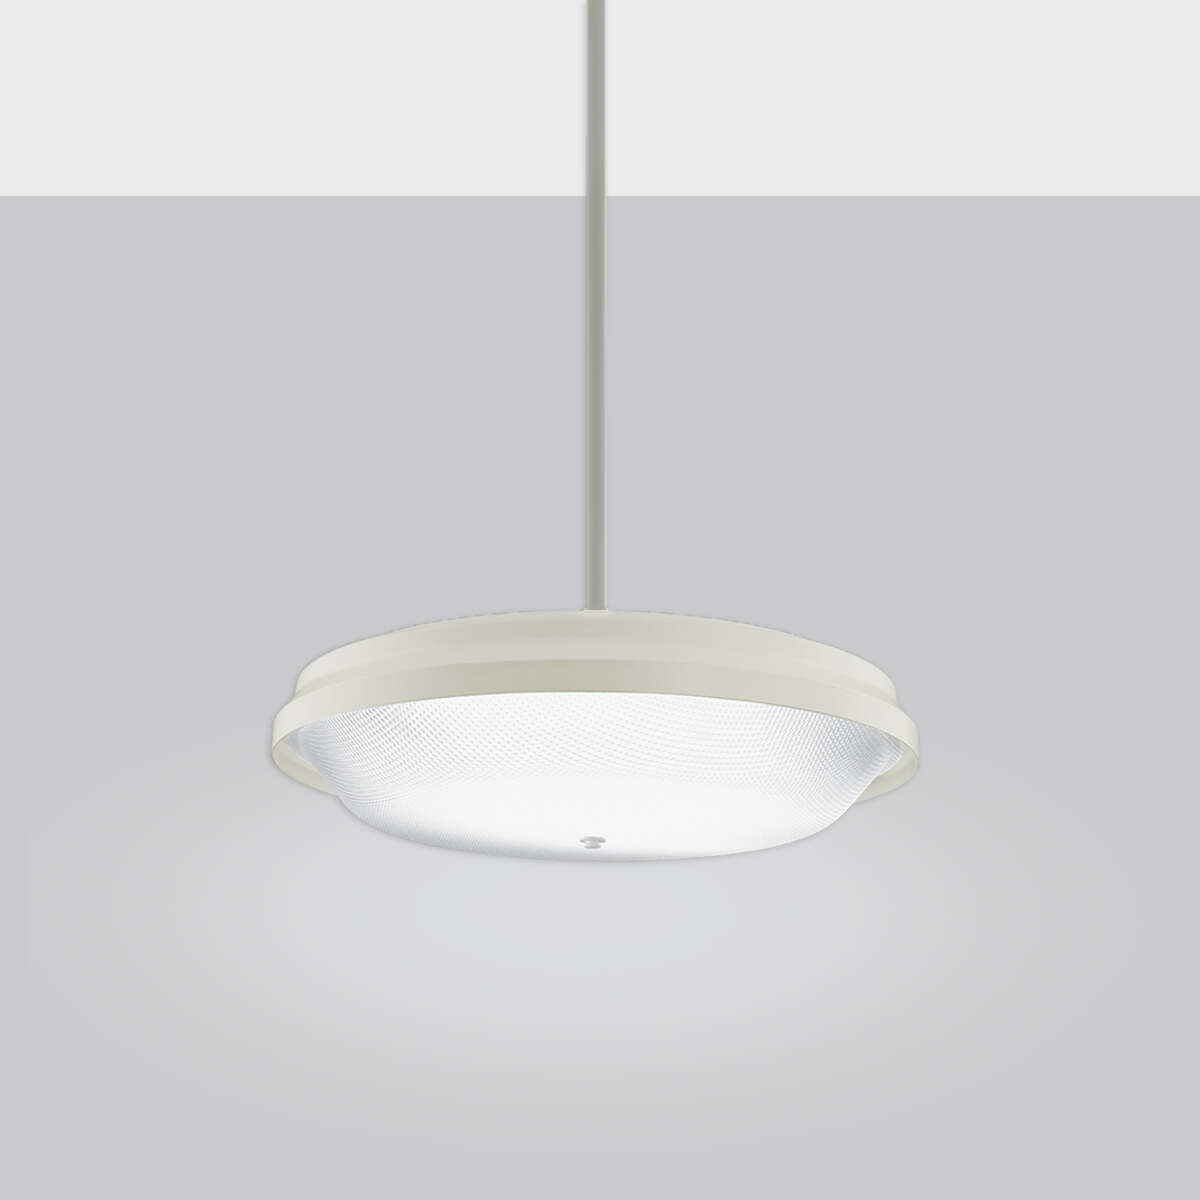 A midbay pendant for industrial performance lighting